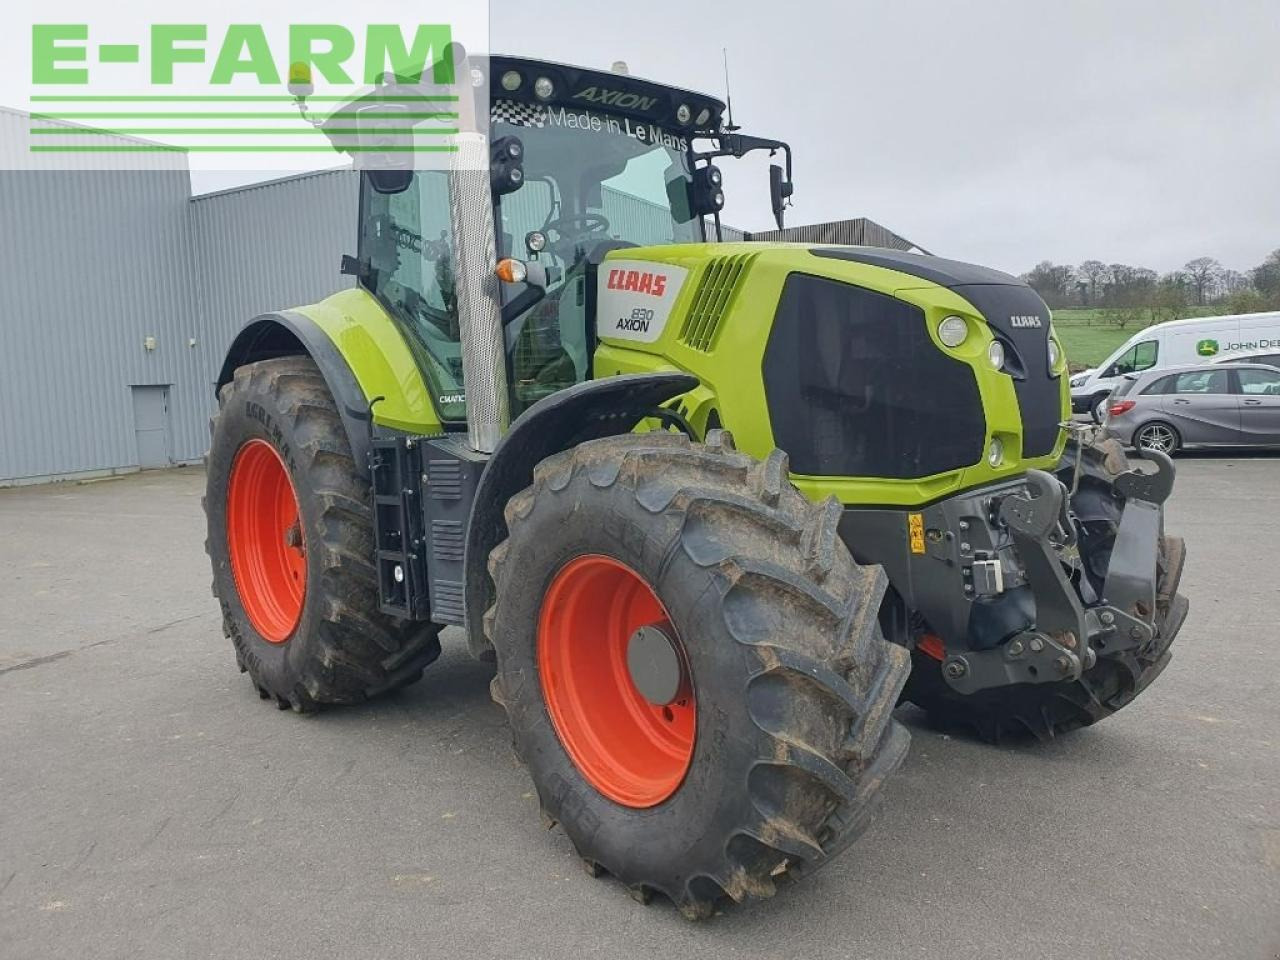 Tracteur agricole CLAAS axion 830 c matic